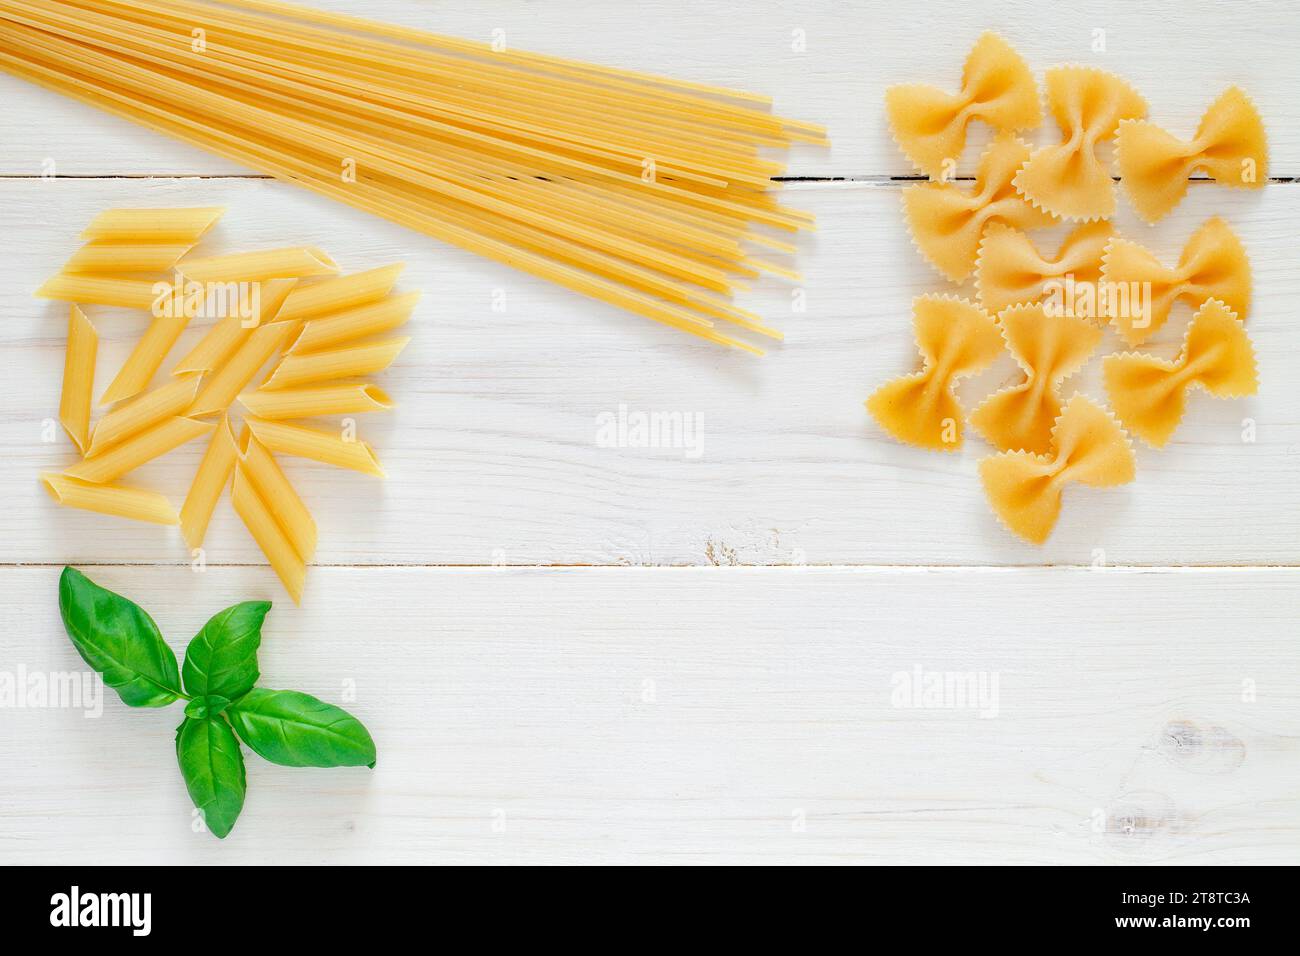 Maccheroni raw, spaghetti, farfalle, pipe, rigatoni, penne, rigate, leaf of basil, on white wooden board background, top view, space to copy text. Stock Photo